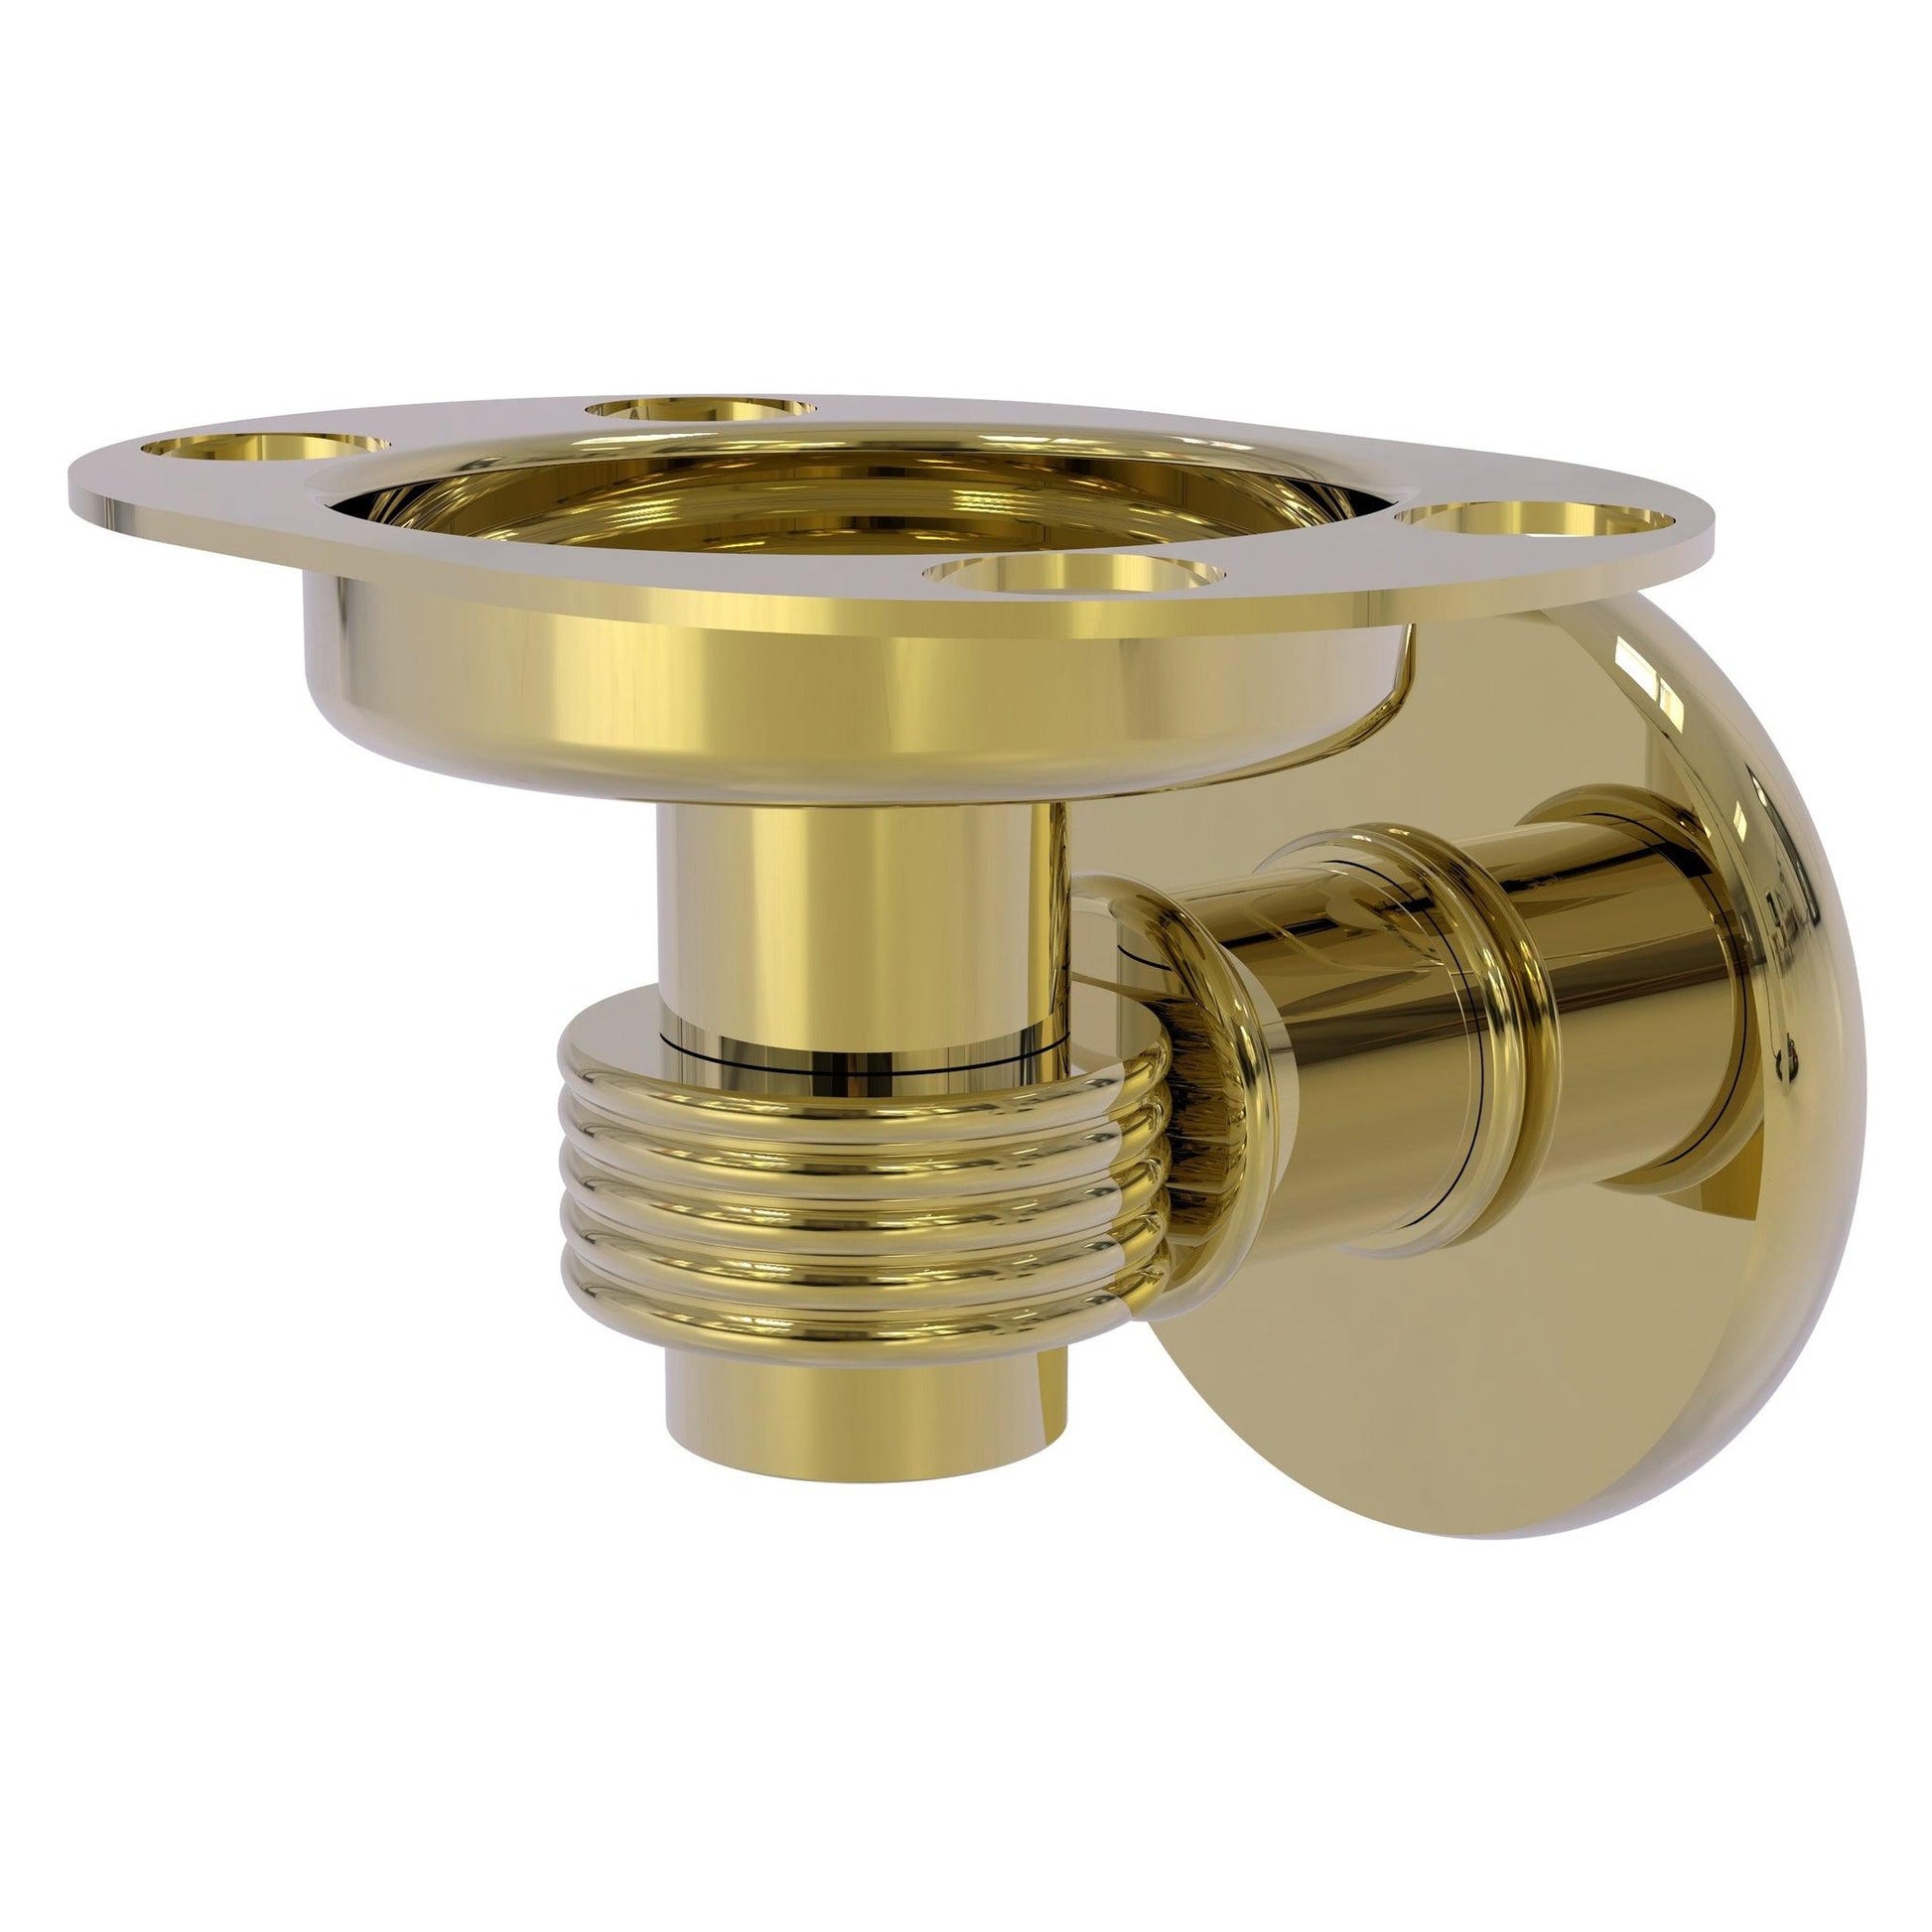 Allied Brass Continental 4.5" x 3.5" Unlacquered Brass Solid Brass Tumbler and Toothbrush Holder with Grooved Accents